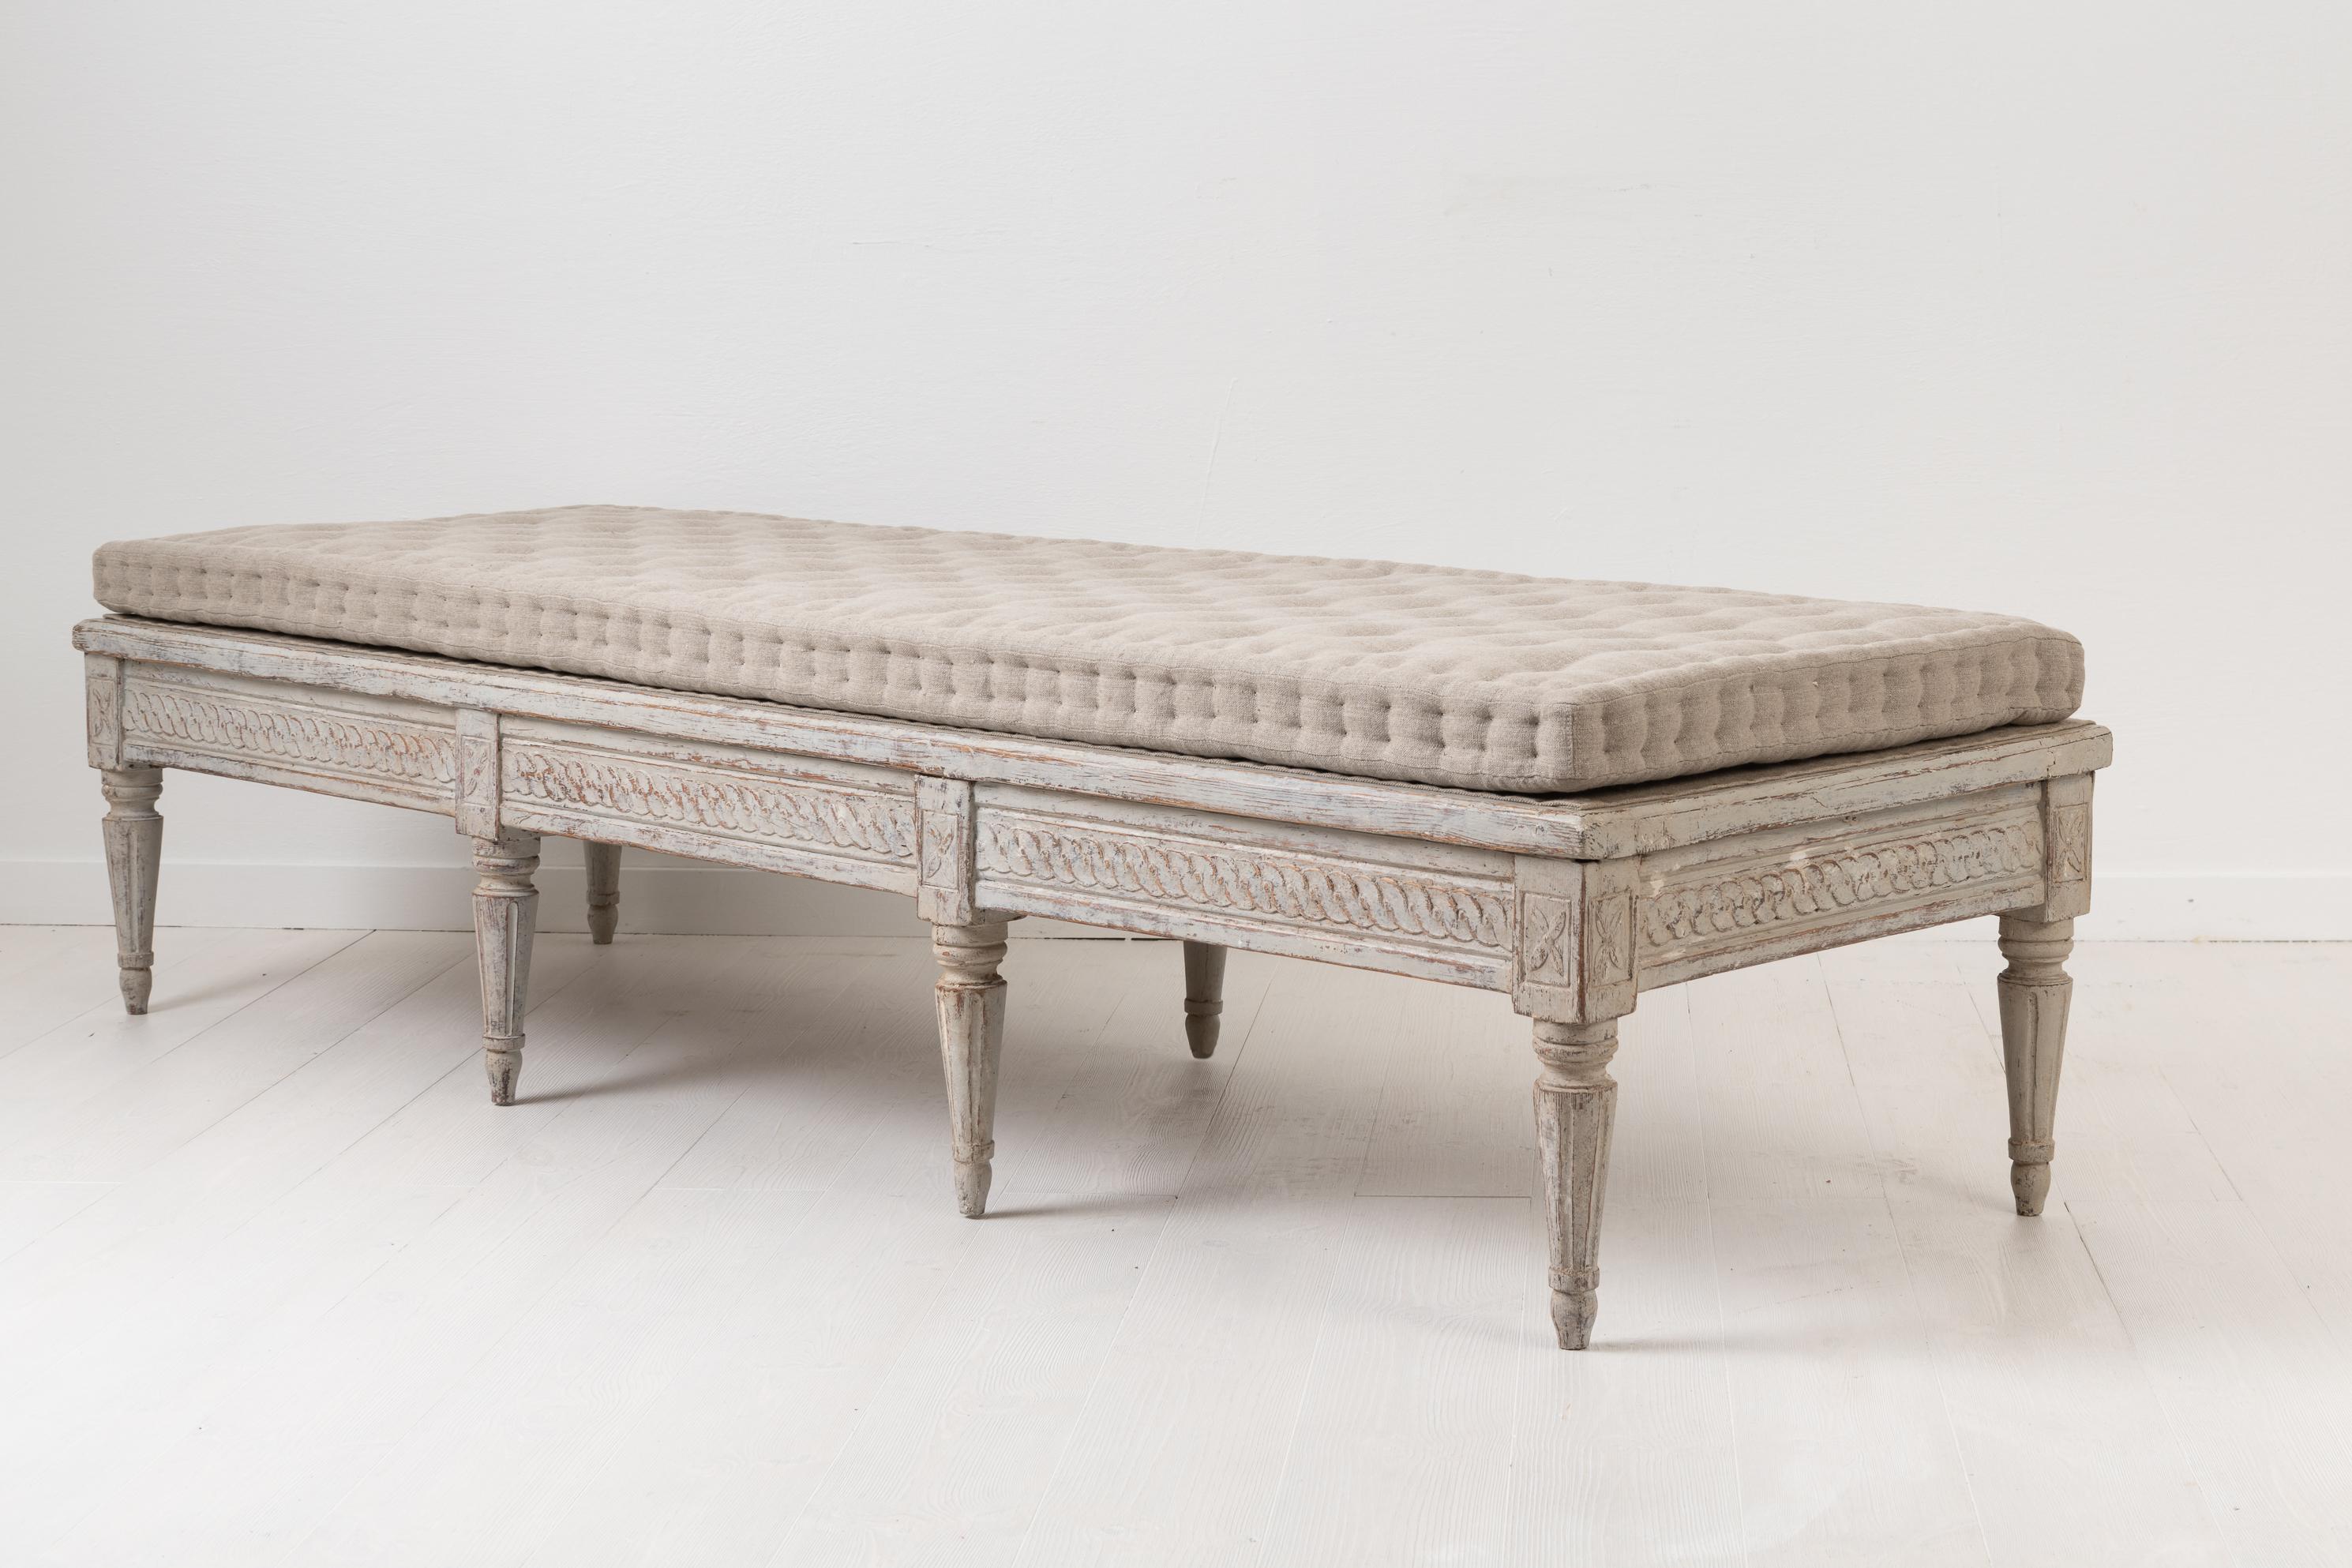 Gustavian Low Antique Swedish Bench with White Distressed Paint